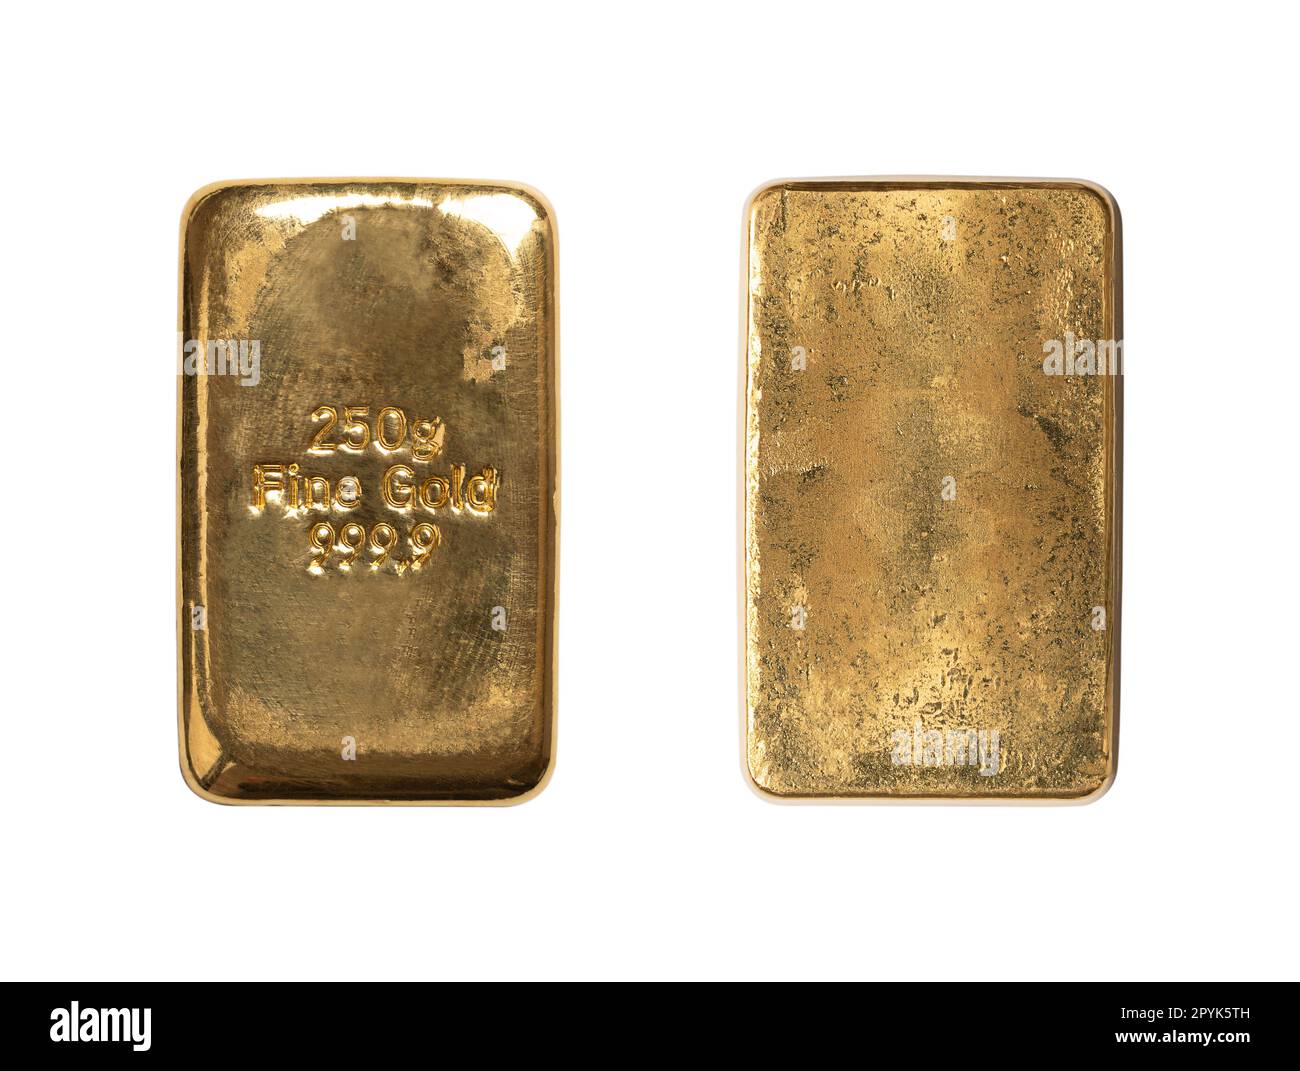 Gold bar, cast gold ingot or bullion, front and back side, from above Stock Photo